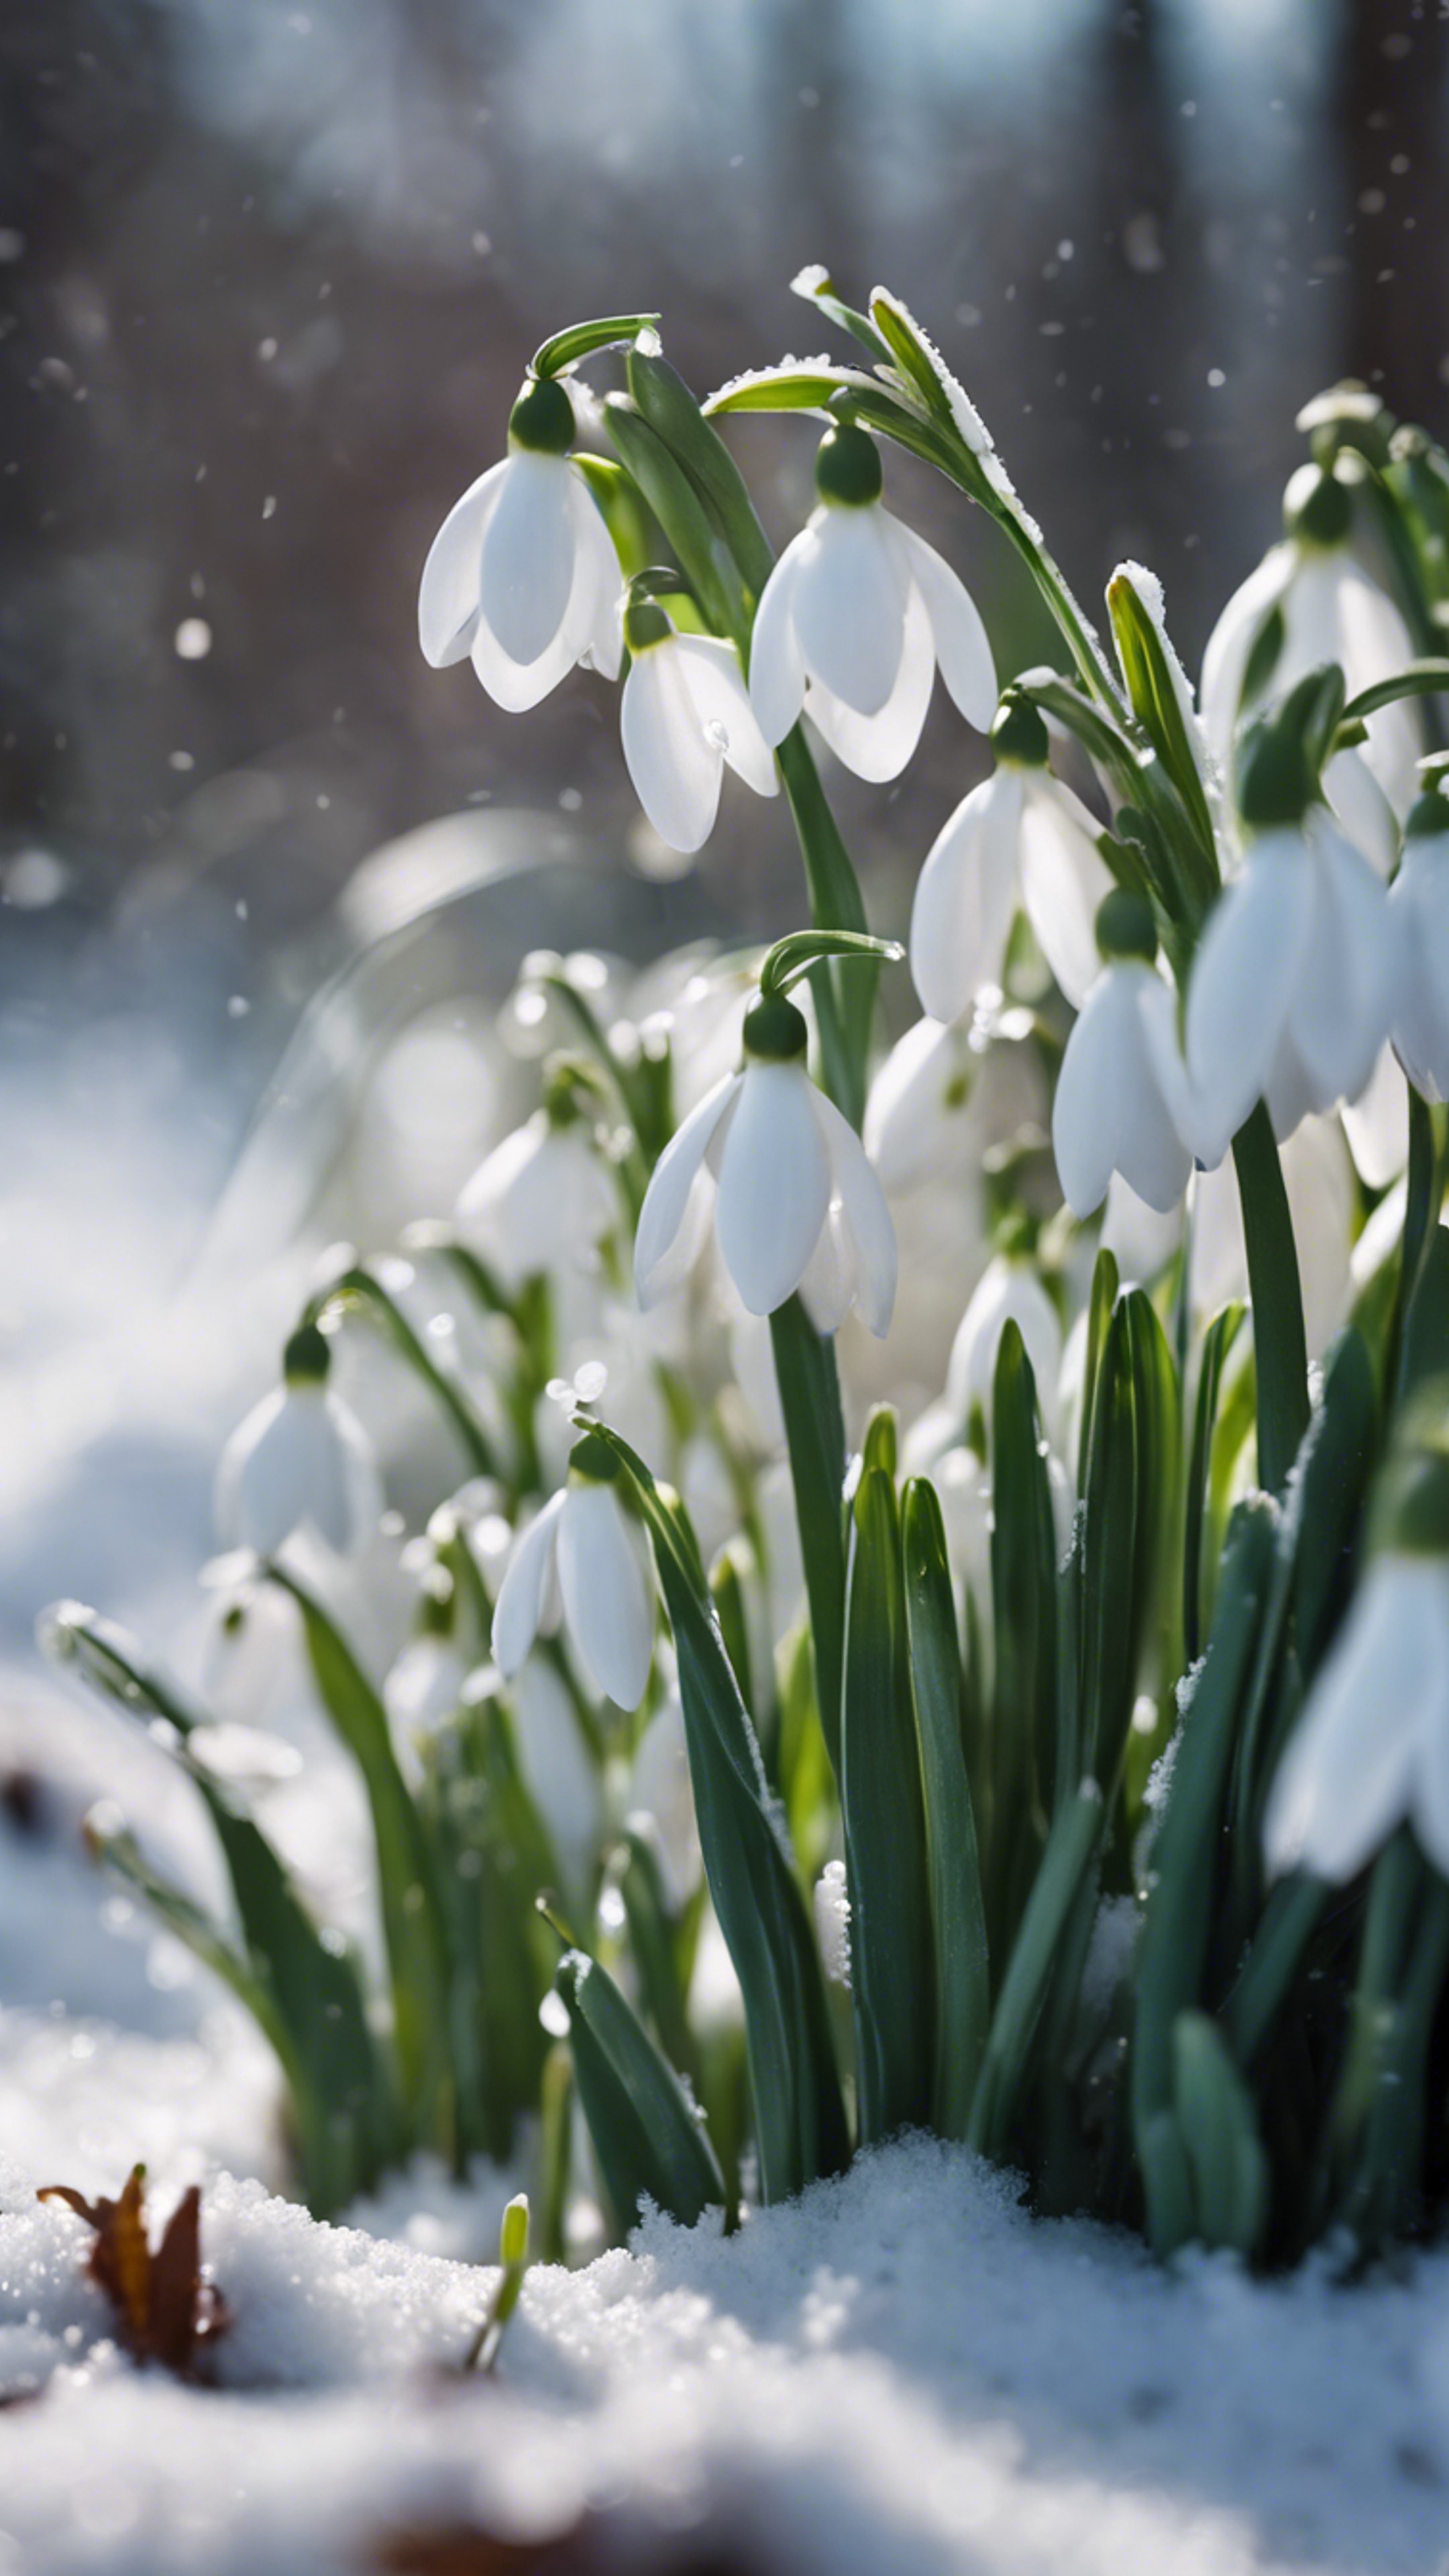 A patch of white snowdrops peeking through a dusting of late spring snow. ورق الجدران[e64c535efd0a459c9840]